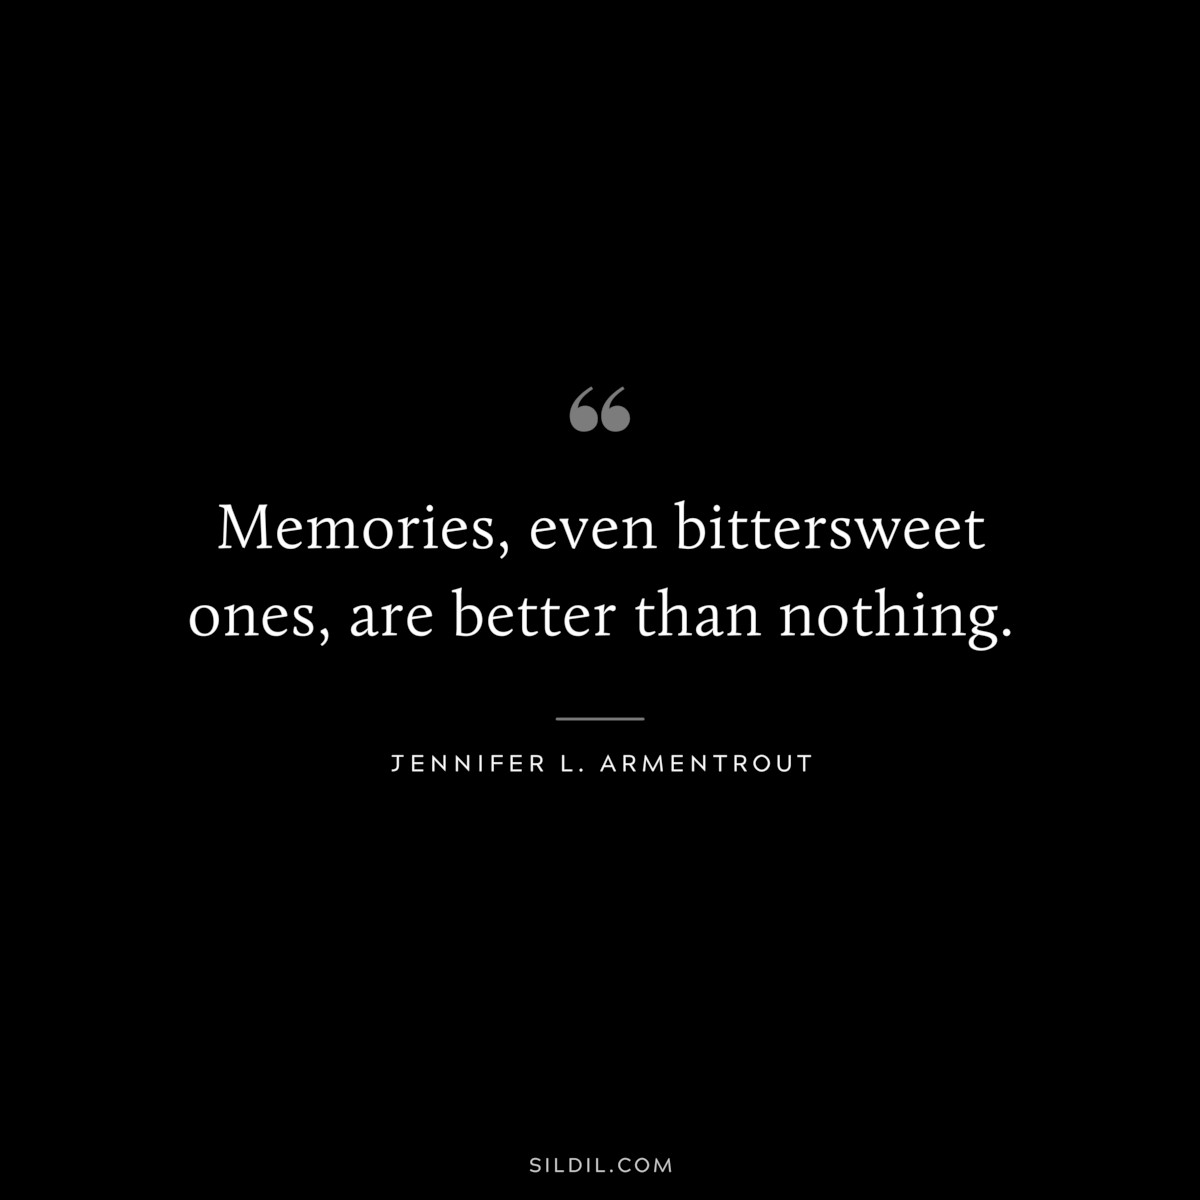 Memories, even bittersweet ones, are better than nothing. ― Jennifer L. Armentrout